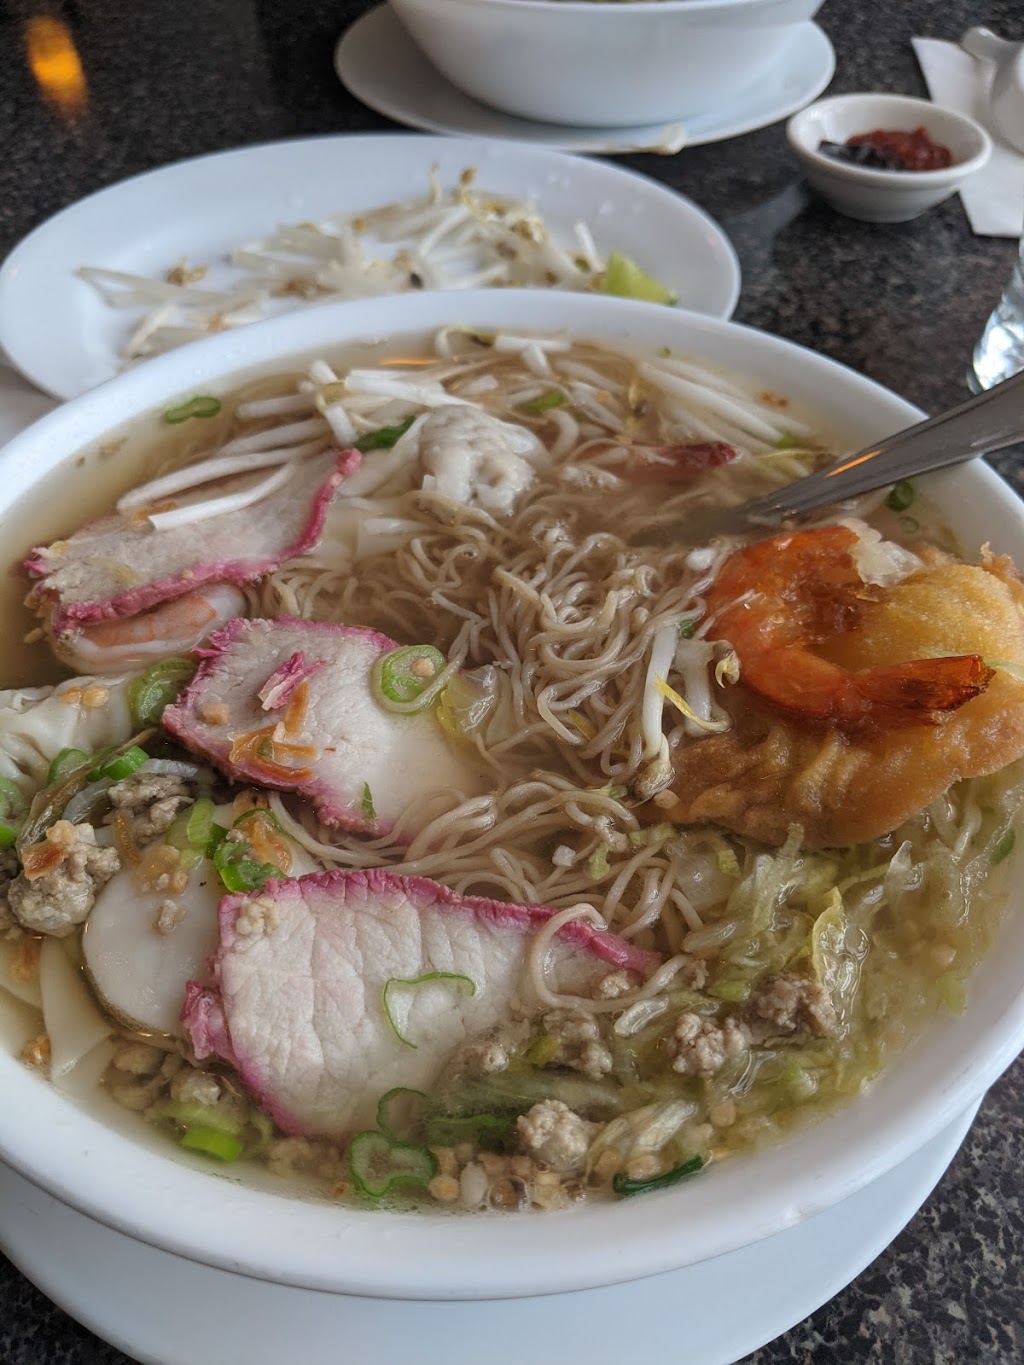 Hung Phat Vietnamese Noodle House | 3849 99 St NW, Edmonton, AB T6E 6H6, Canada | Phone: (780) 988-8218